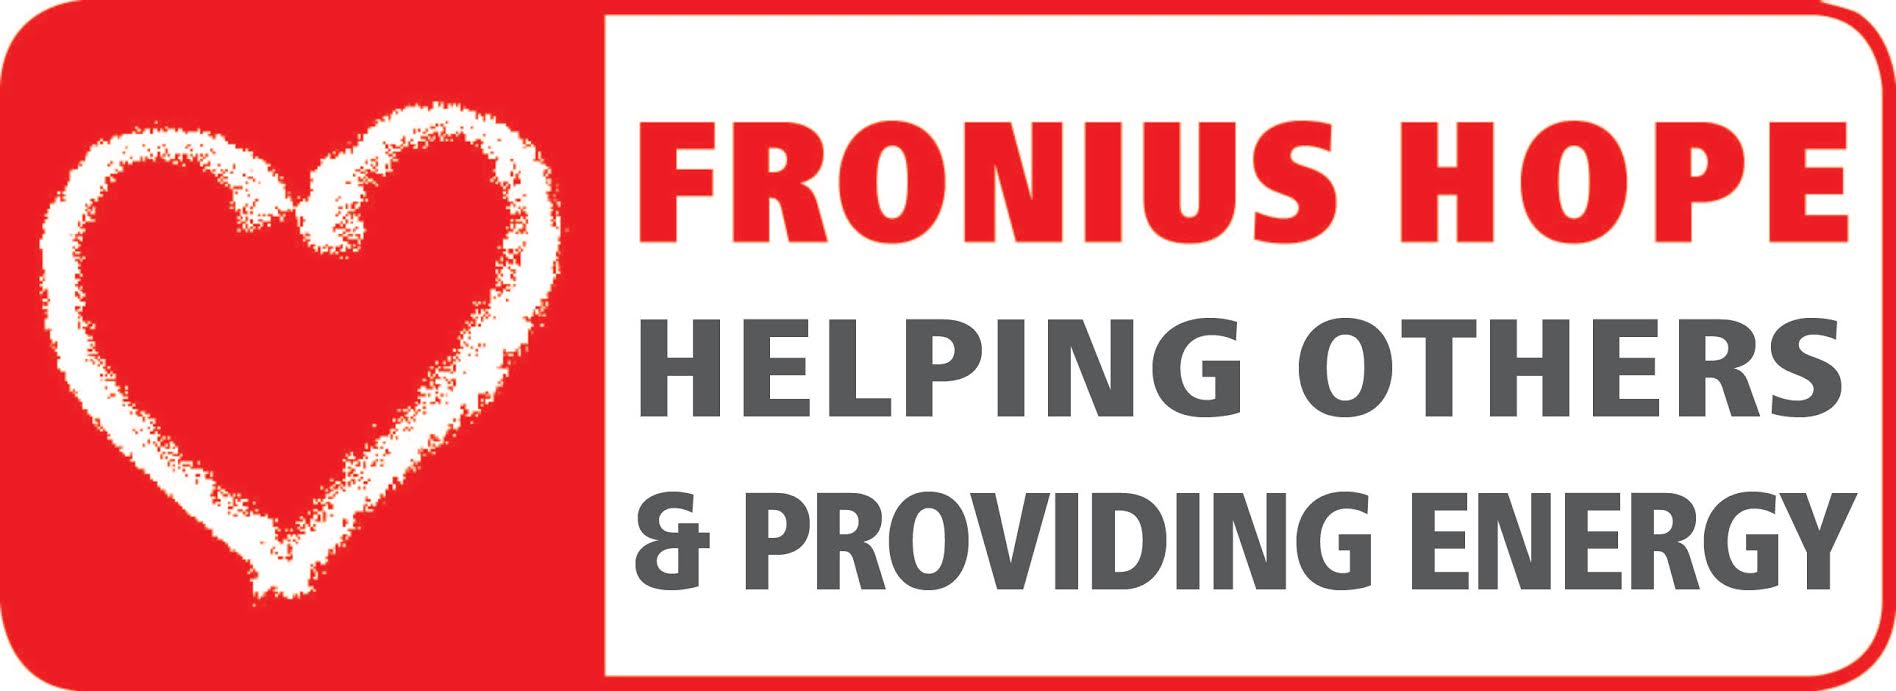 Fronius USA recently partnered with the United Way of Porter County to conduct two Days of Caring at the area Boys and Girls Clubs to compliment Fronius’ new HOPE (Helping Others & Providing Energy) program.